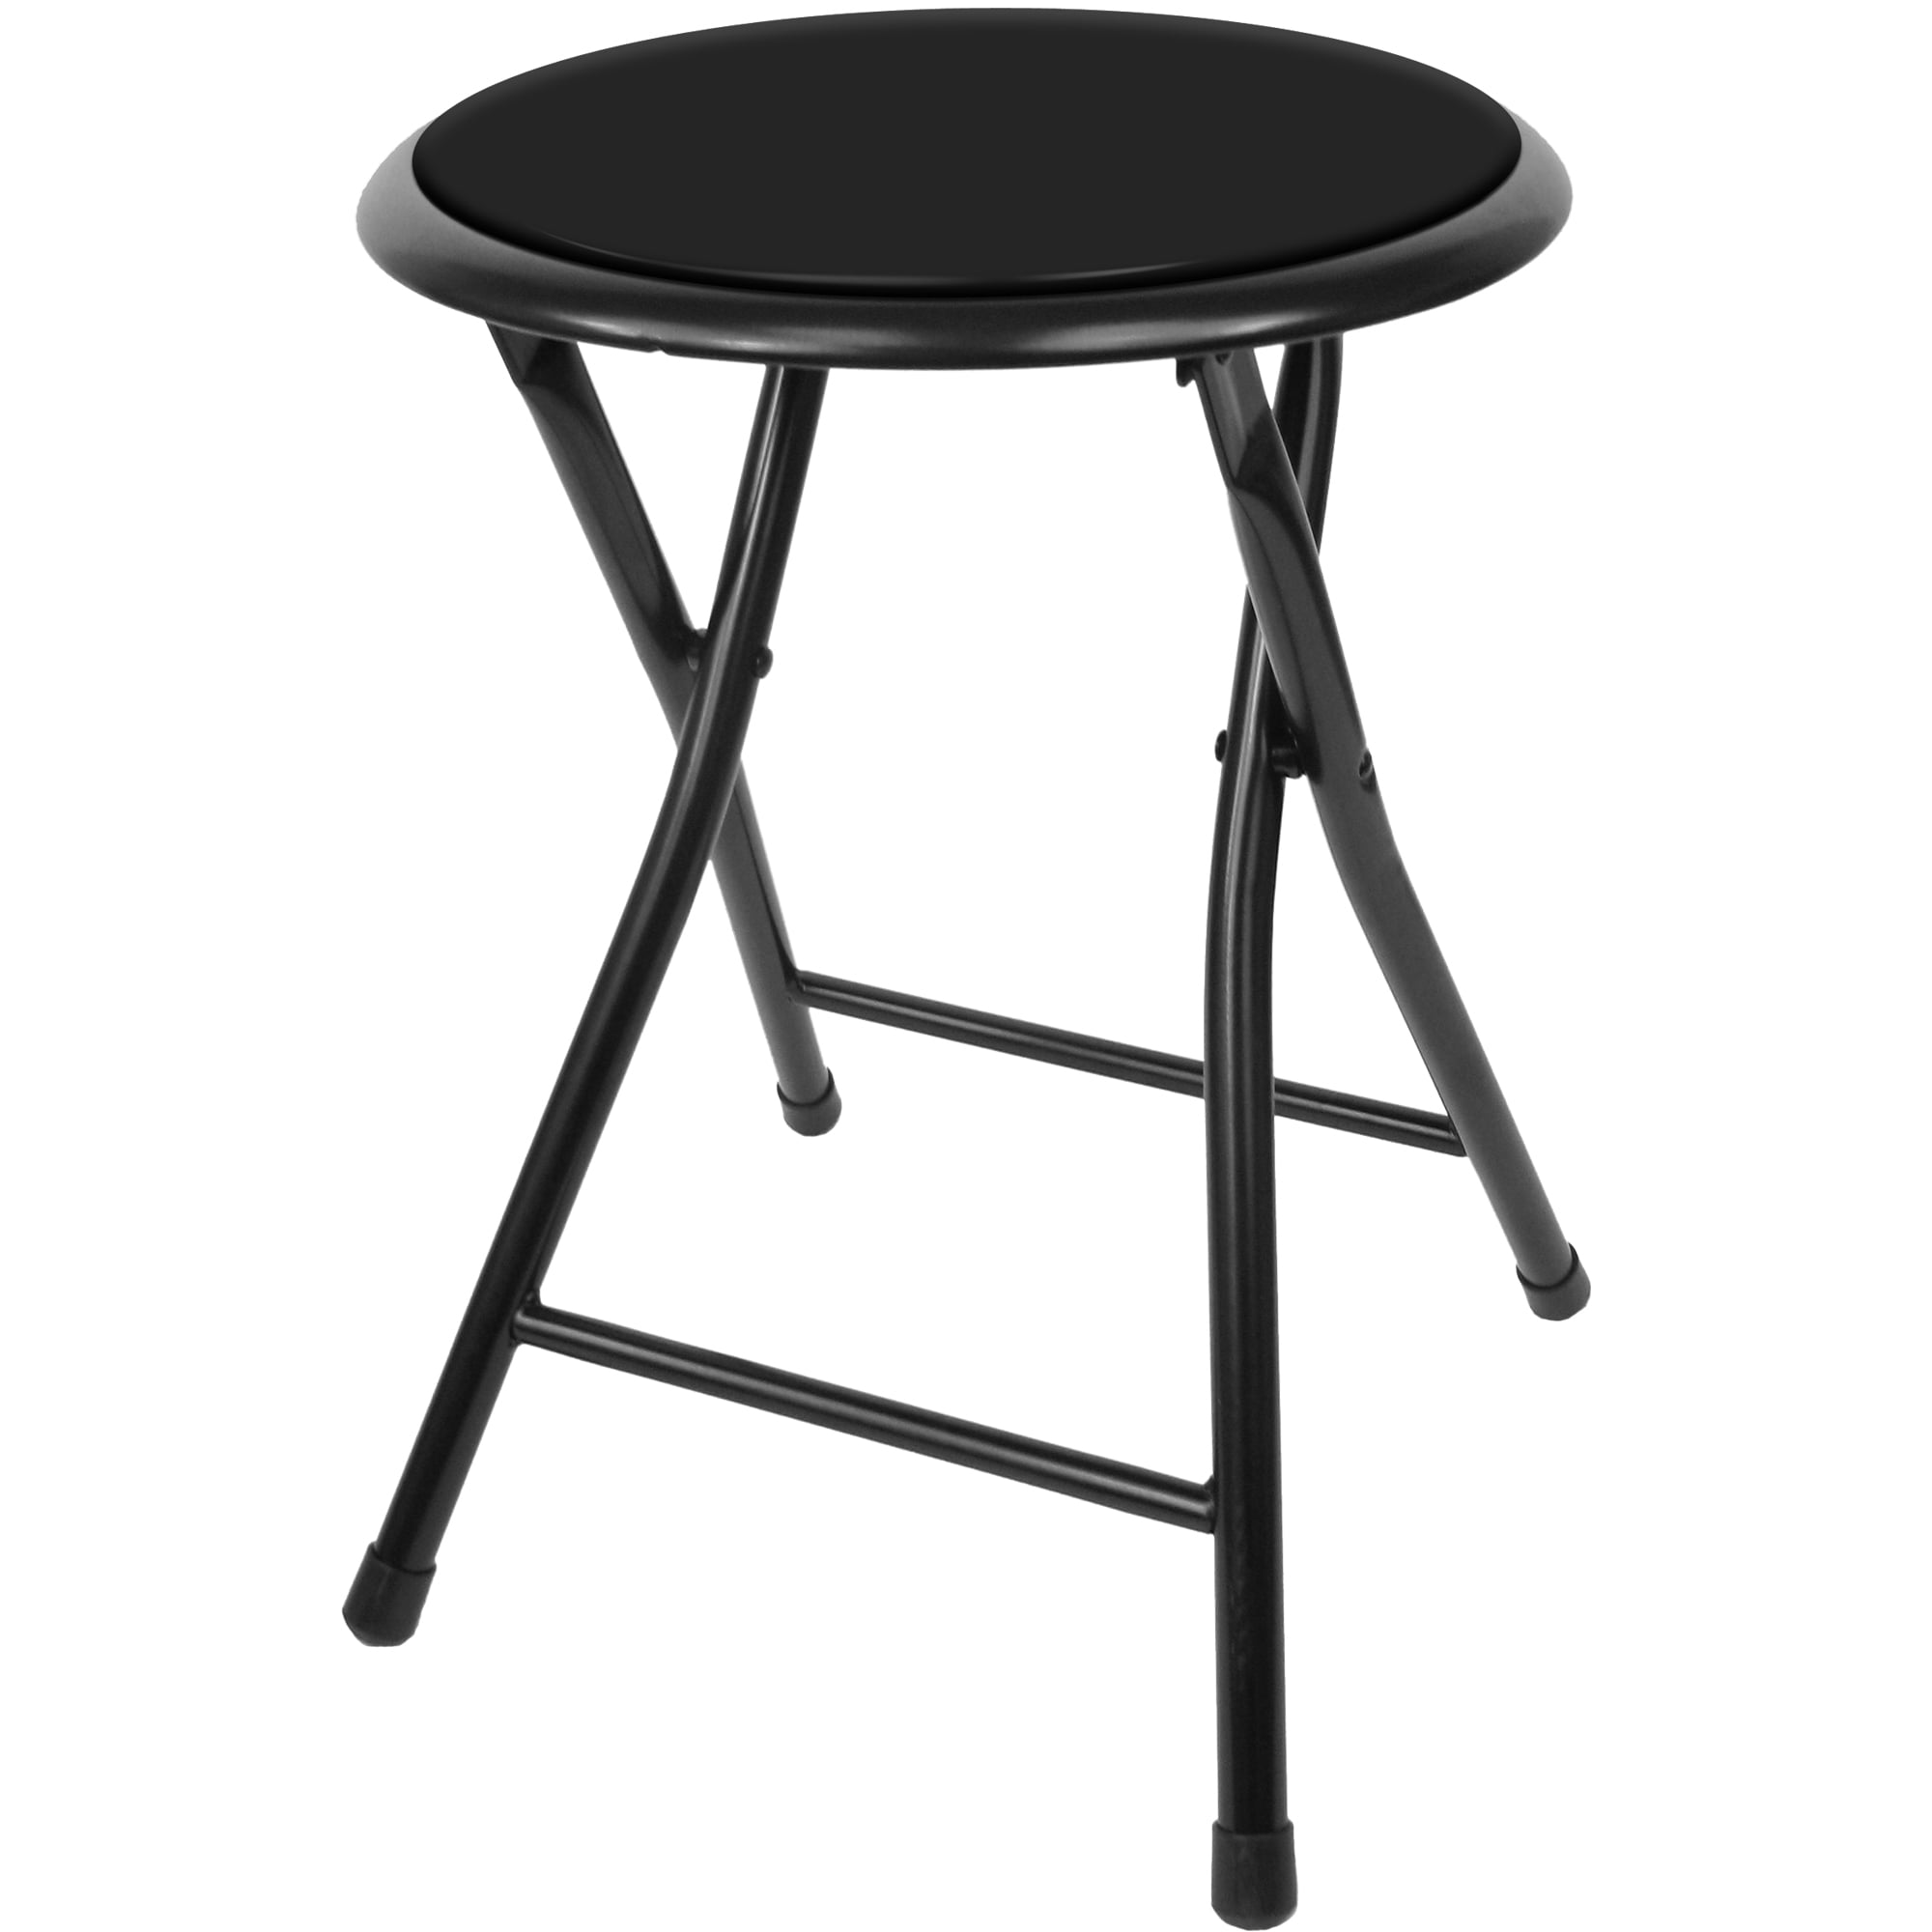 ROUND LIGHT WEIGHT FOLDING BREAKFAST STOOL HIGH CHAIR PADDED SEAT HOME OFFICE 